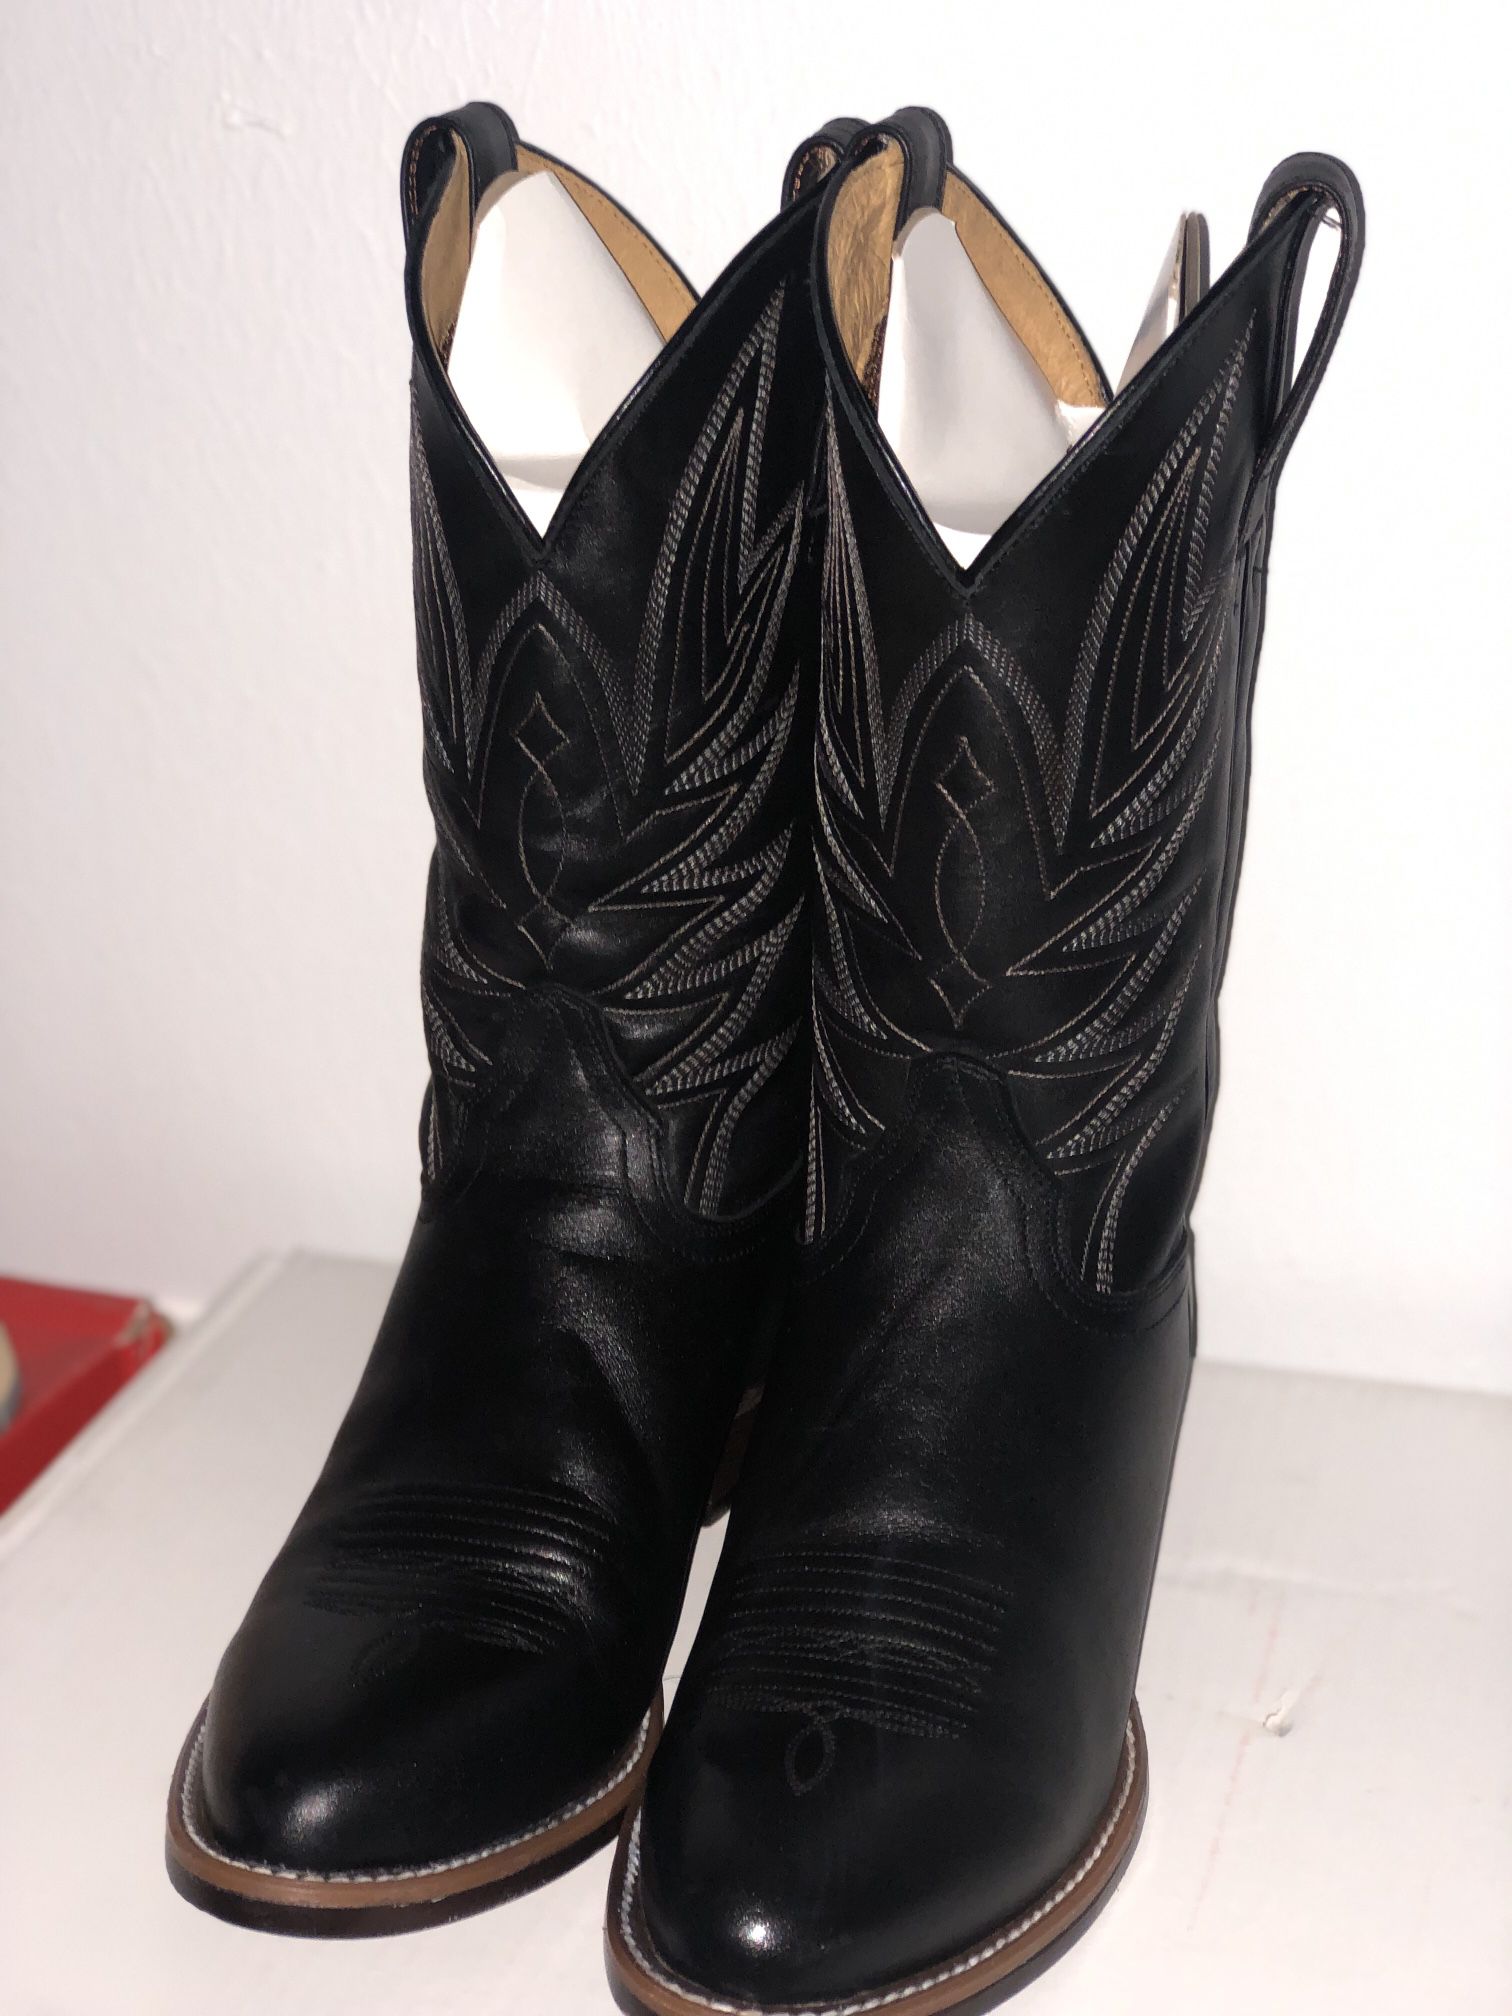 Black Leather Boots Cody James 